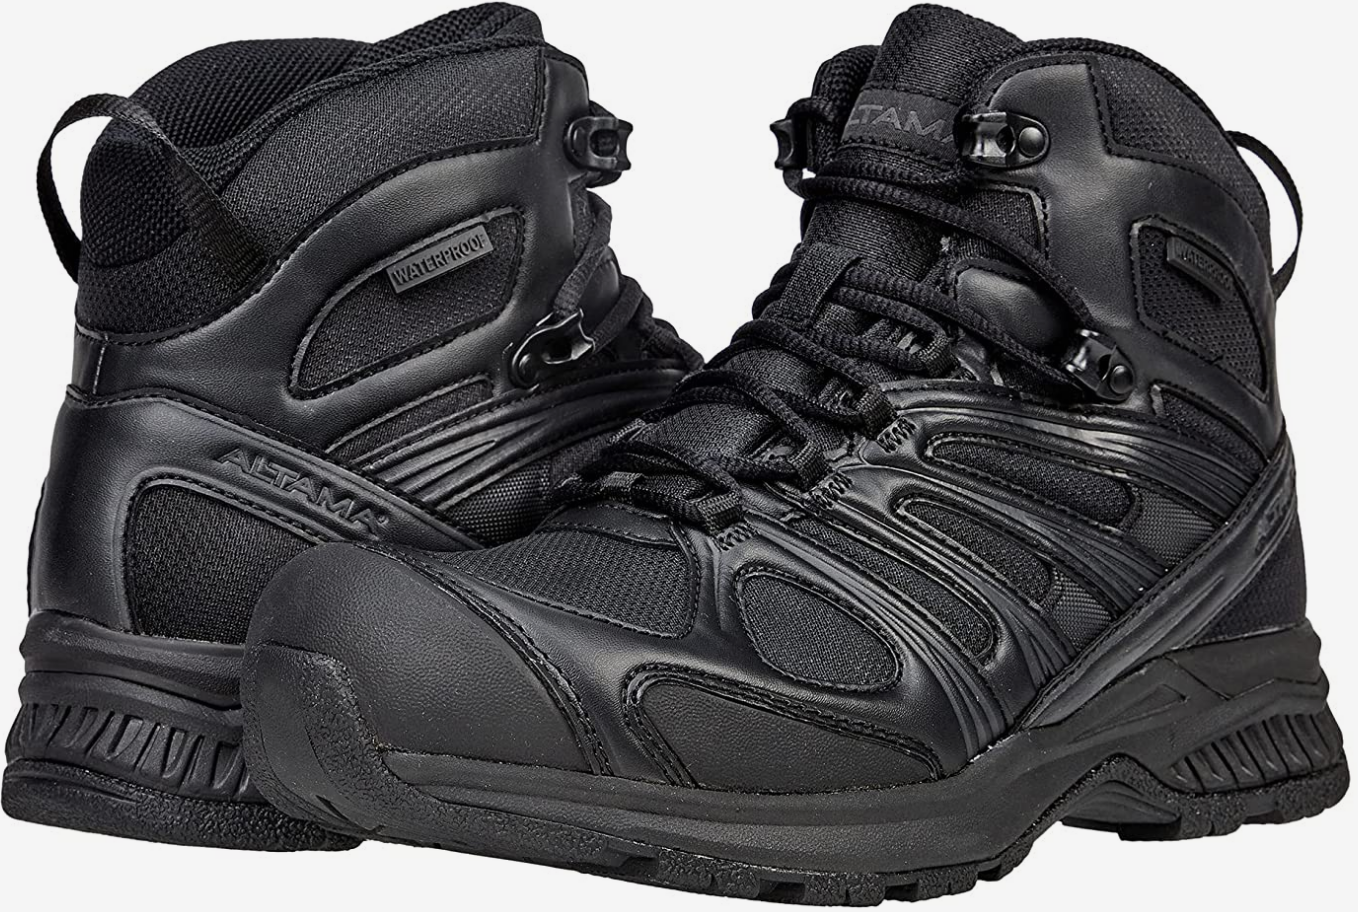 ABOOTTABAD abbad mid black boot shoe trail mil spec tactical hiker